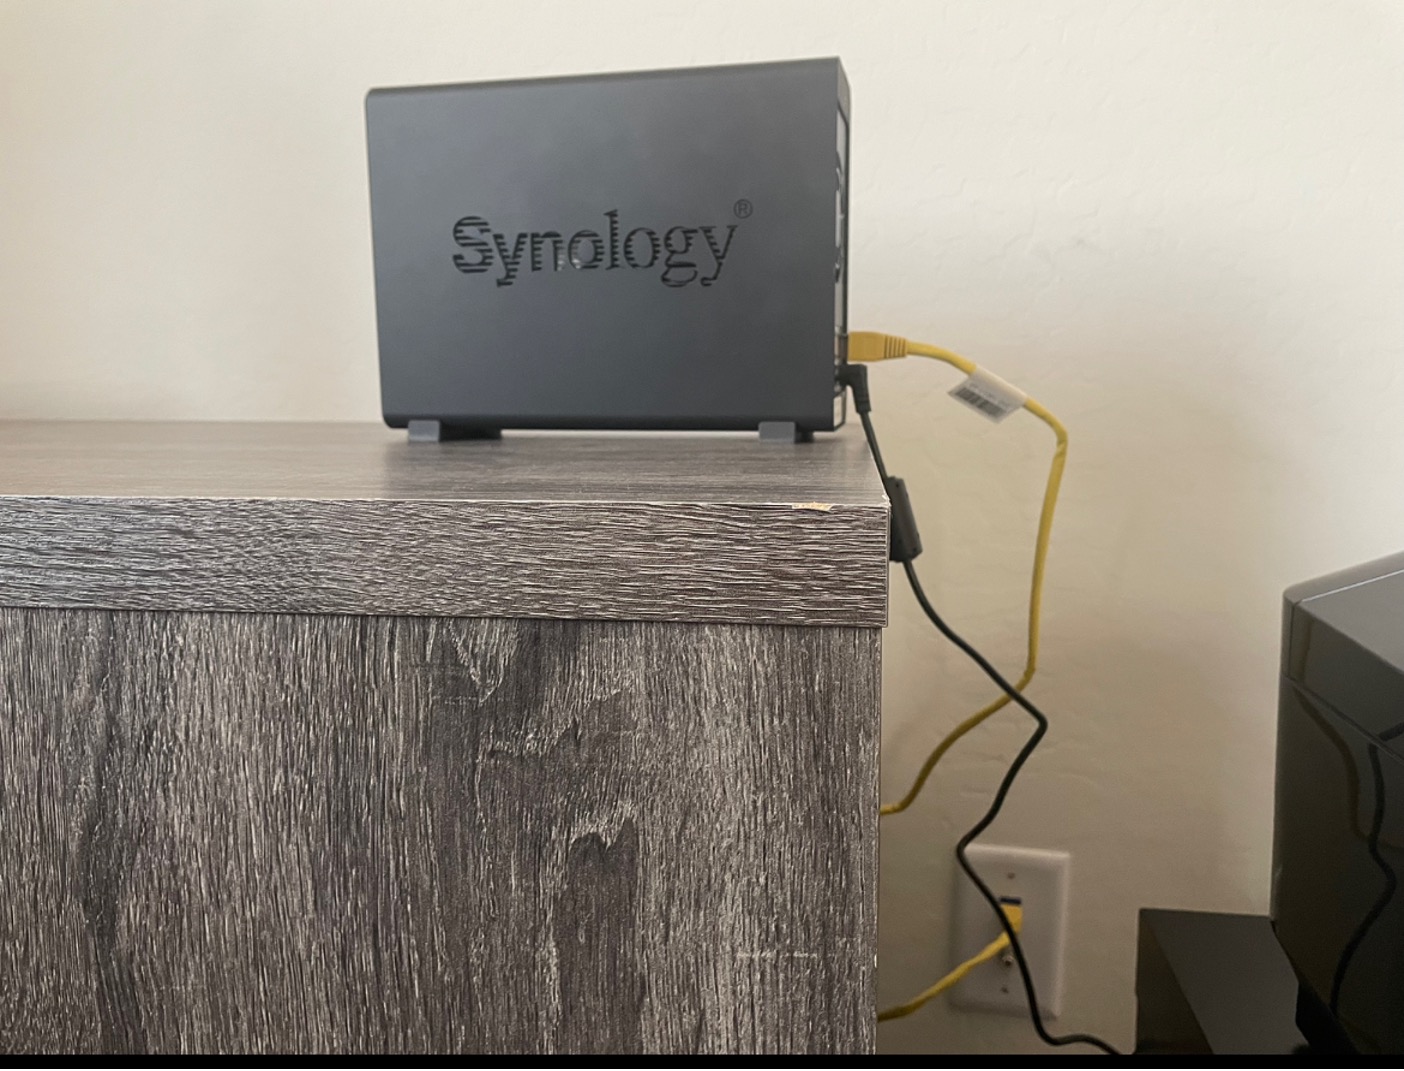 An image of a Synology NAS device set up on a desk and plugged into an ethernet connection.